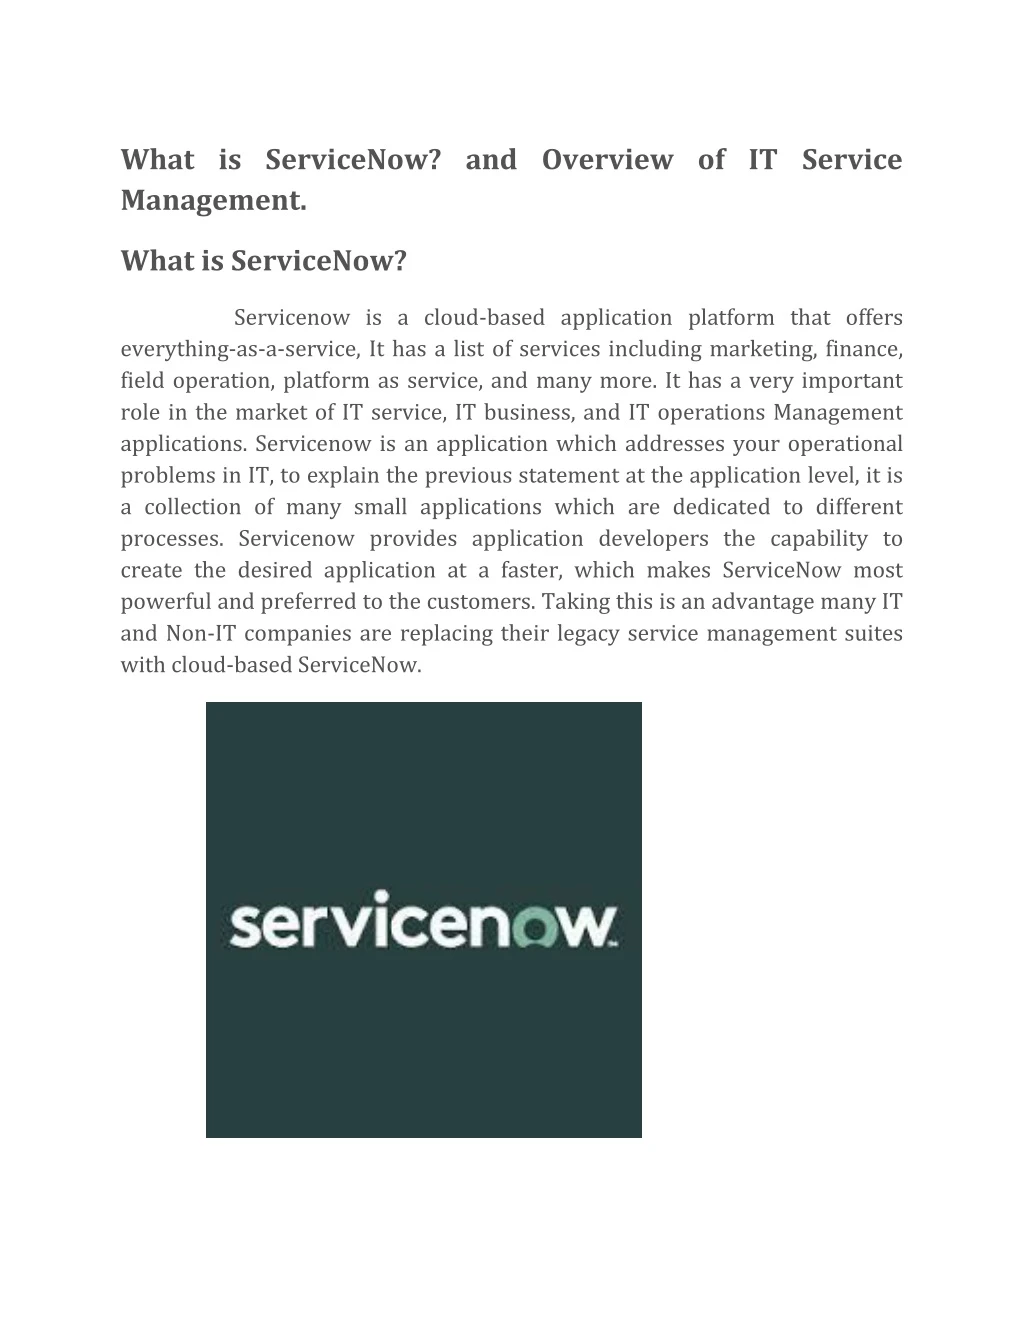 what is servicenow and overview of it service